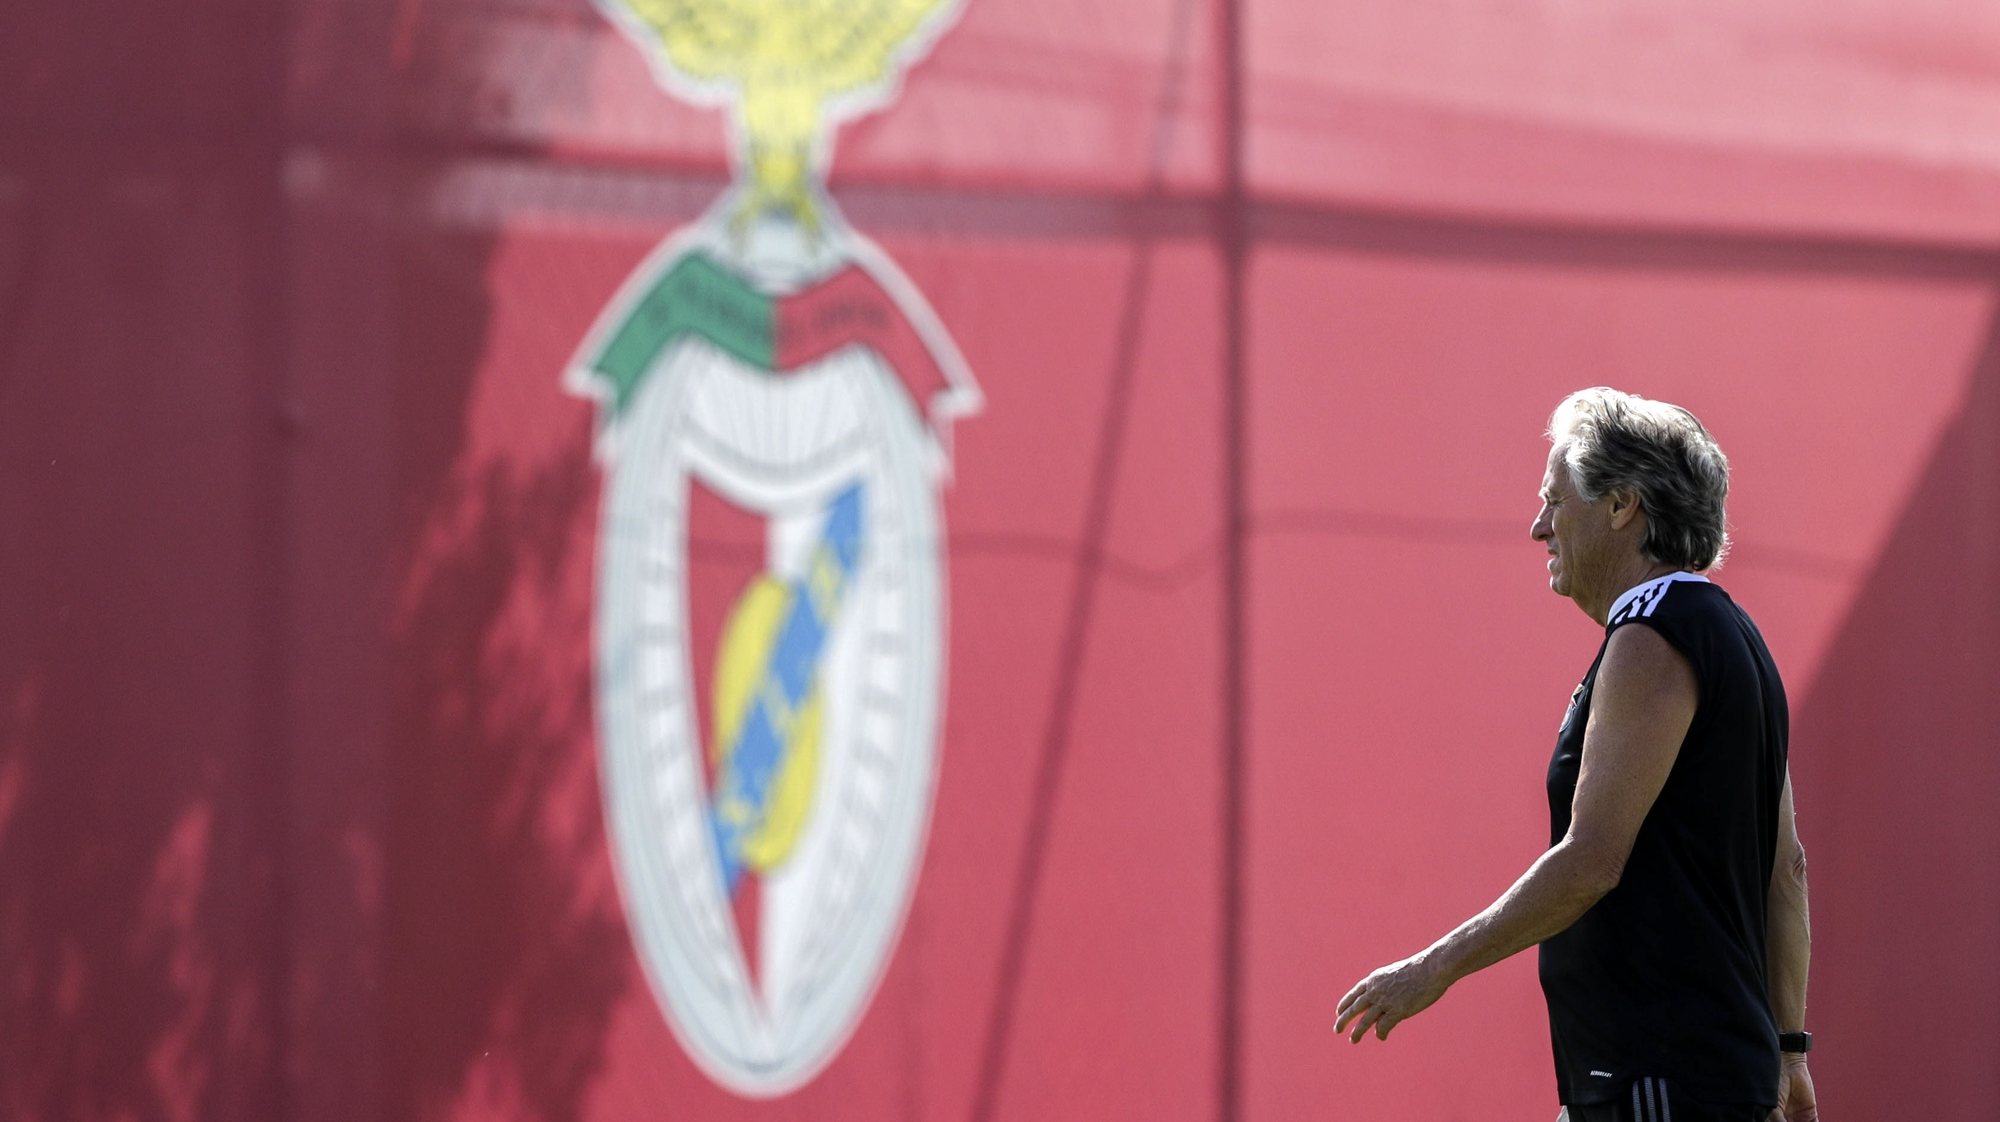 Benfica&#039;s head coach Jorge Jesus leads a training session at Seixal Campus, Portugal, 23 August 2021. Benfica will face PSV Eindhoven in a UEFA Champions League play-off second leg soccer match on 24 August 2021. TIAGO PETINGA/LUSA